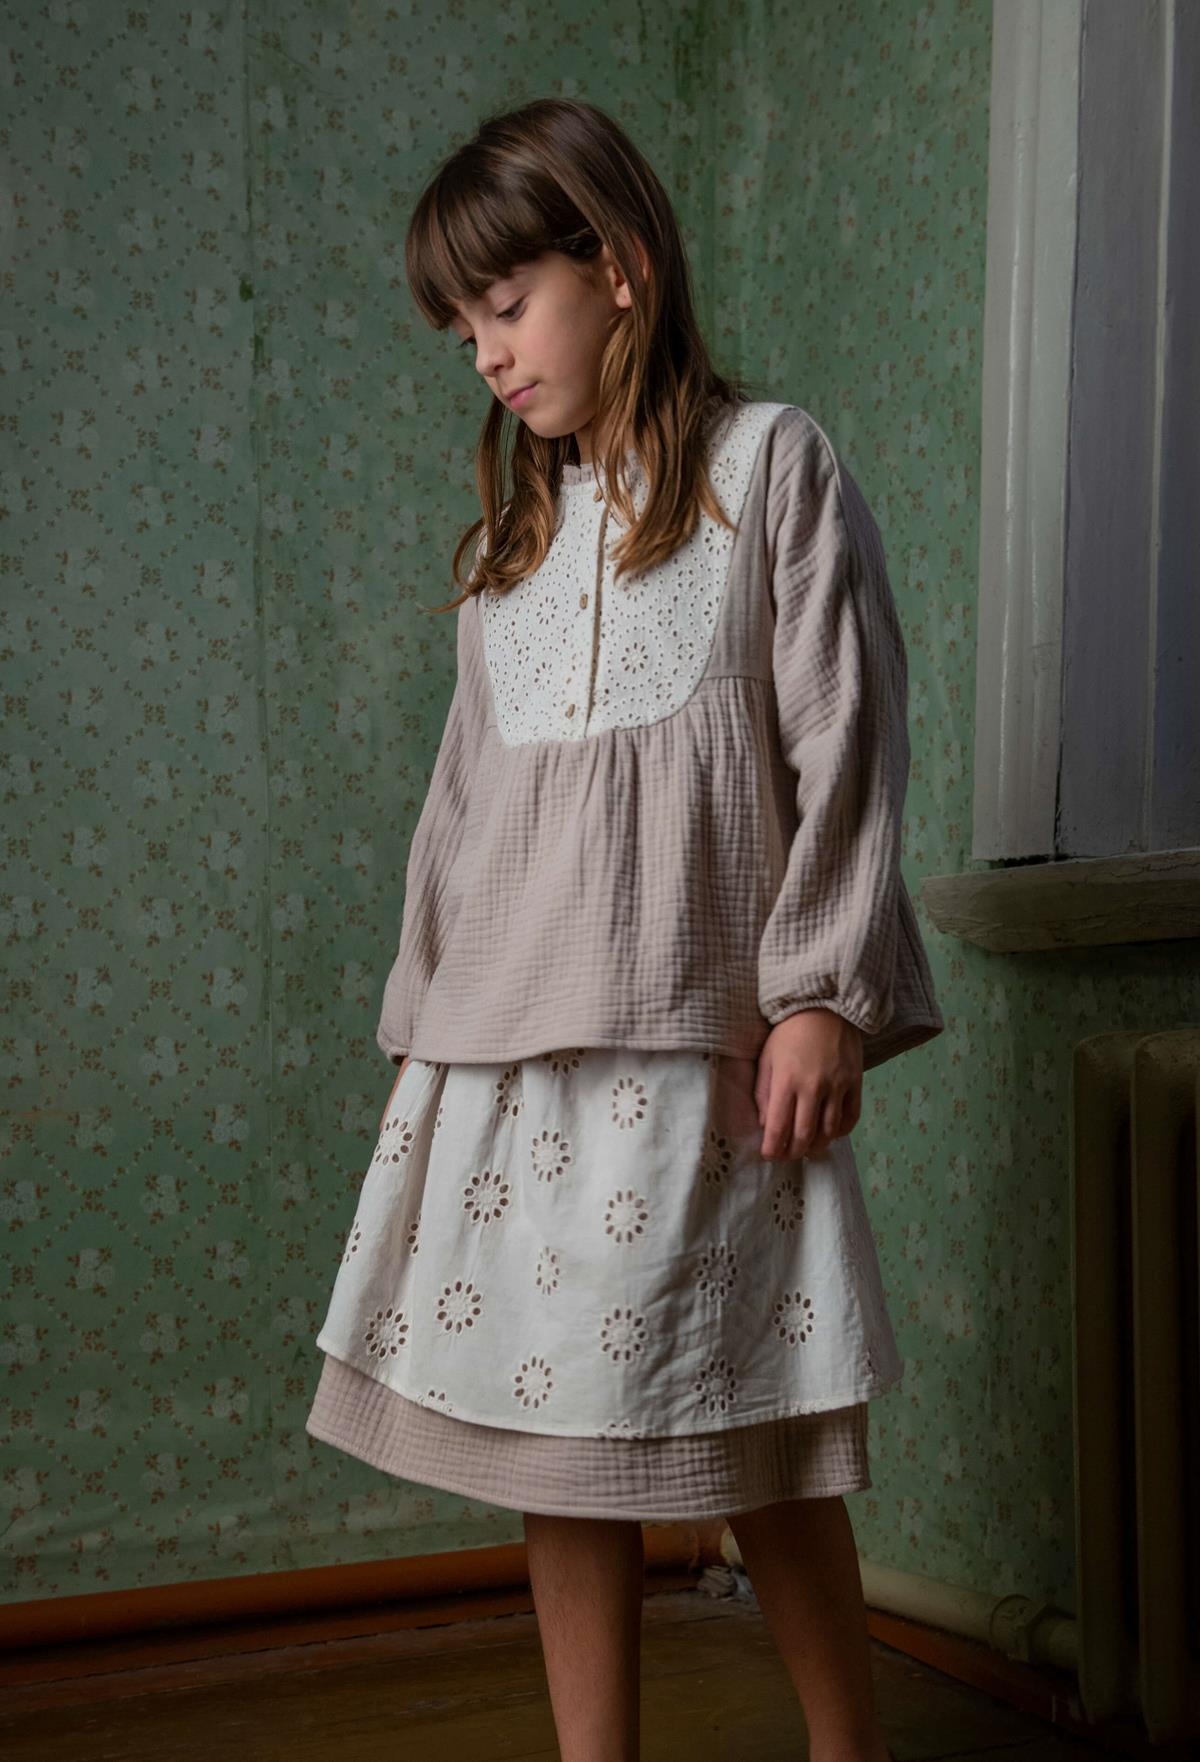 Mod.14.1 Taupe blouse with yoke and Swiss embroidery | AW22.23 Mod.14.1 Taupe blouse with yoke and Swiss embroidery